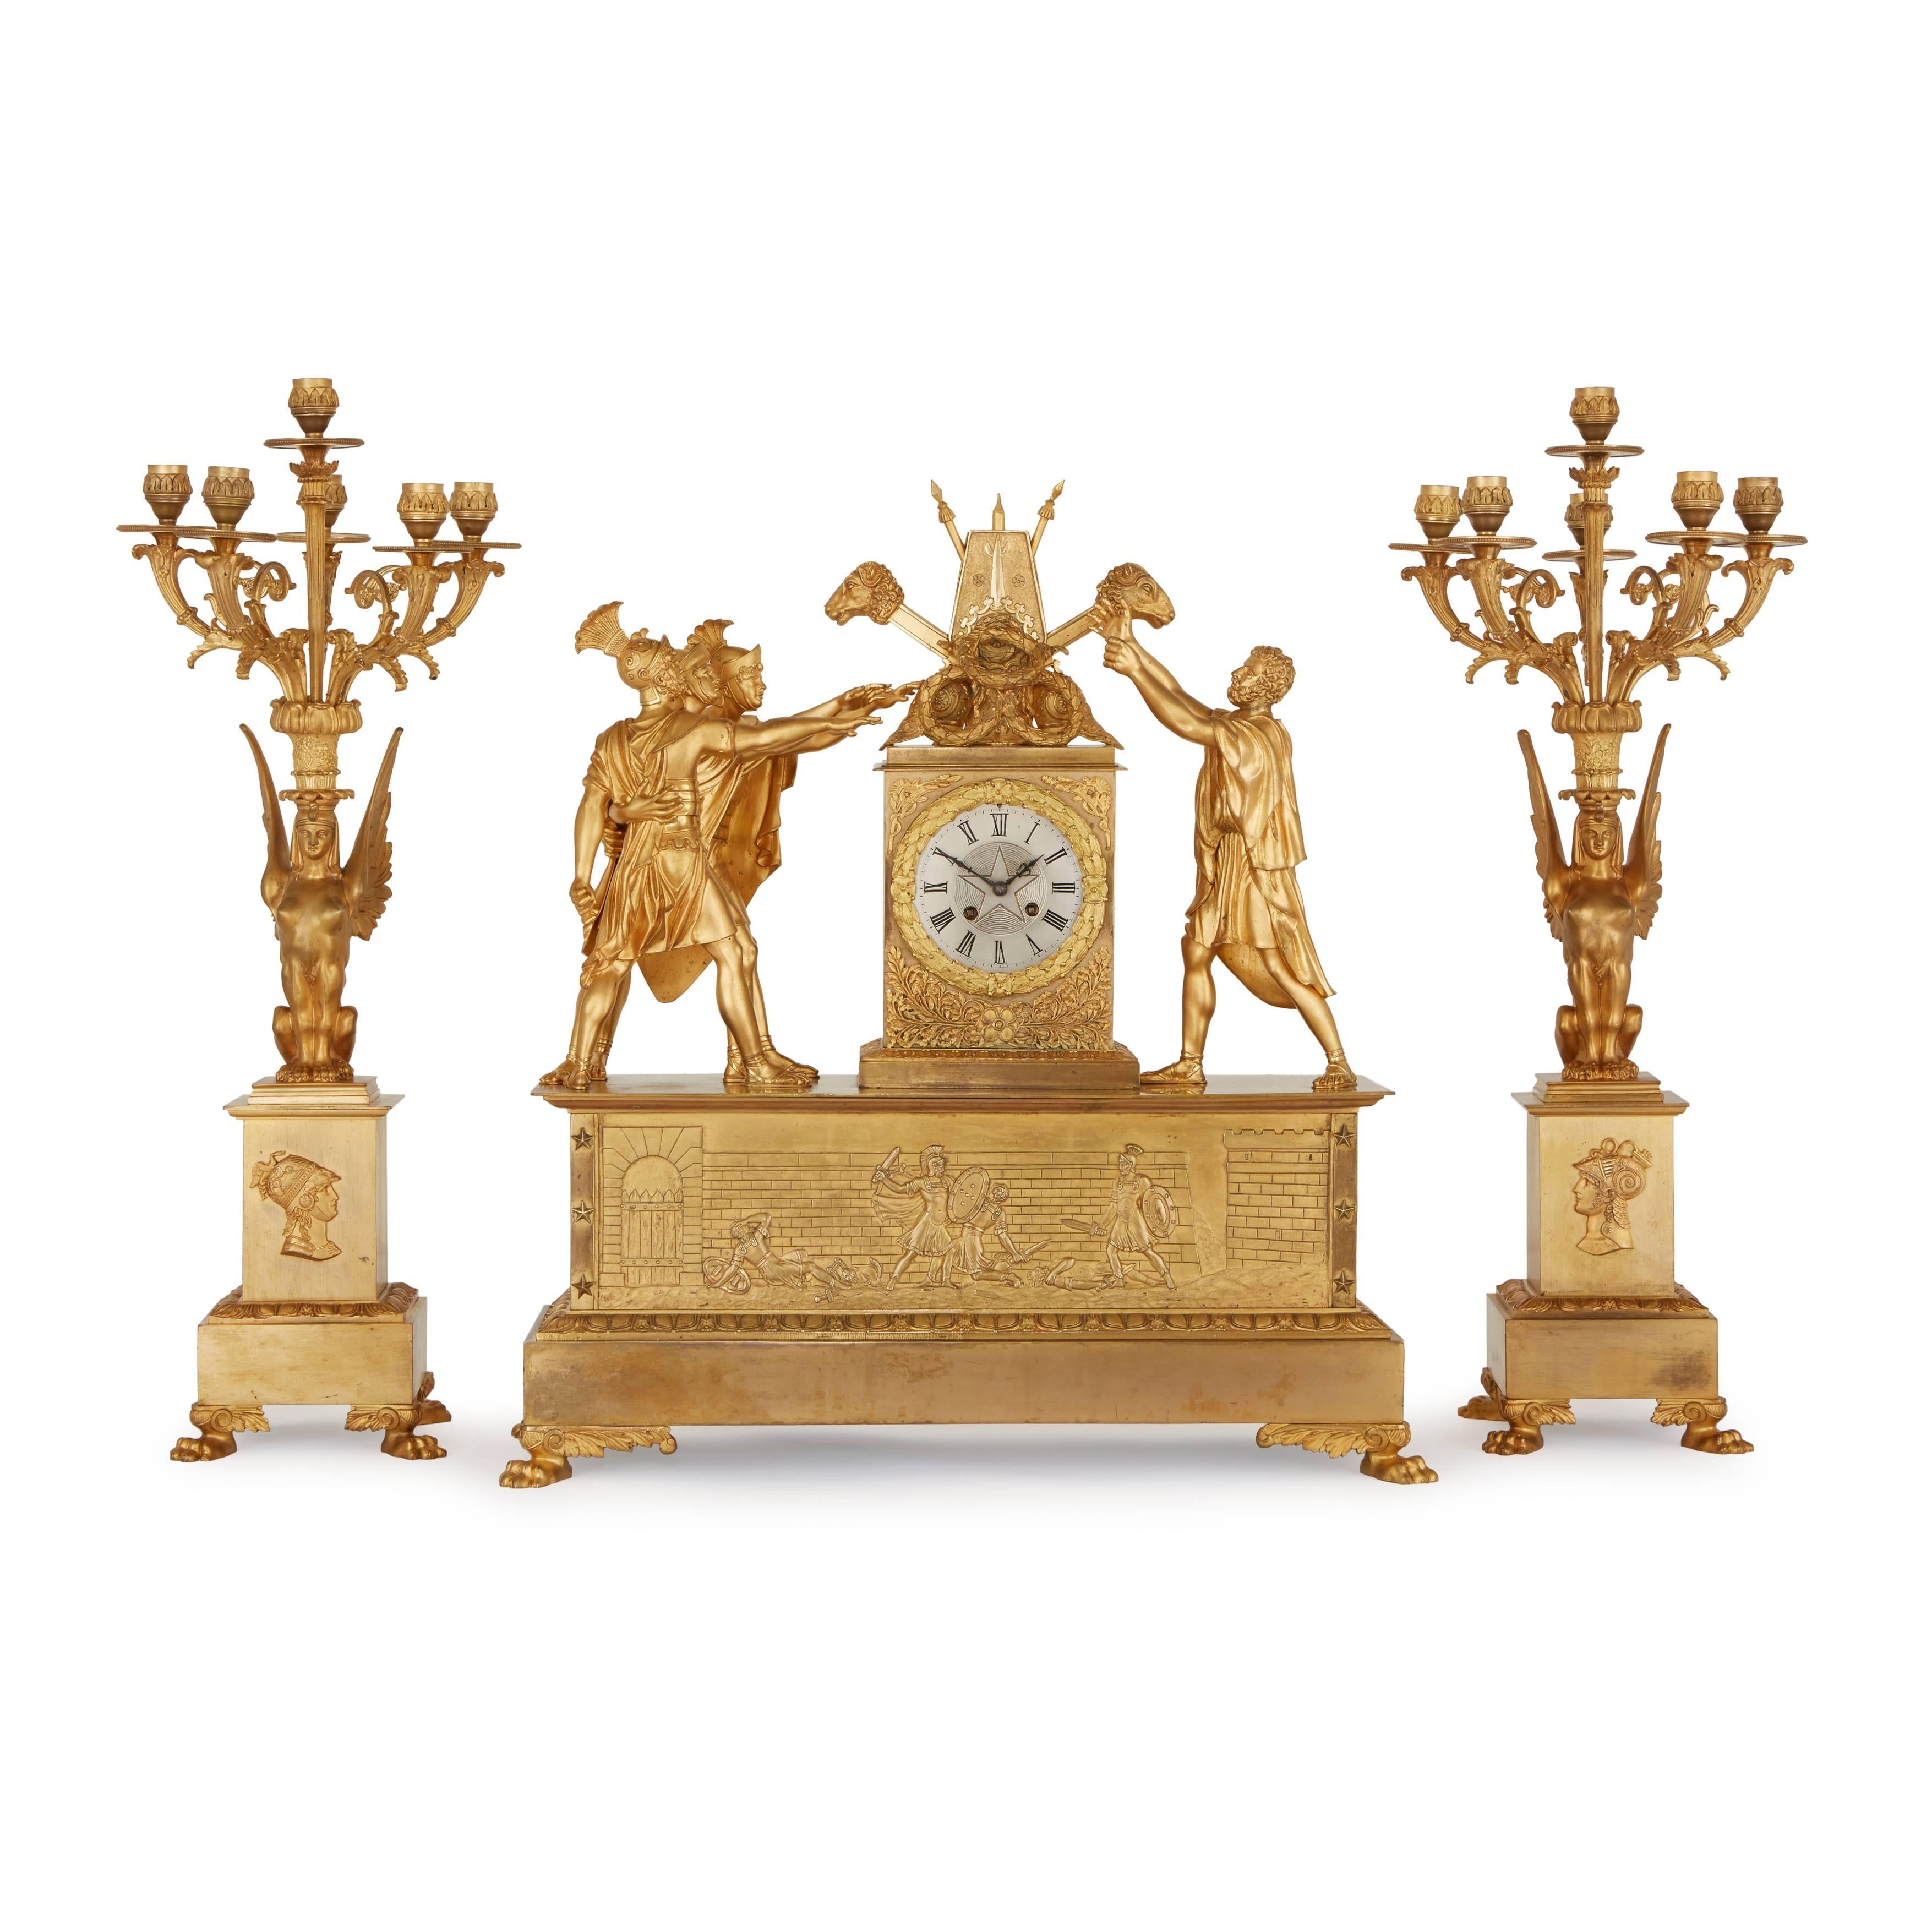 This exquisite 19th century trio is comprised of a central clock and a pair of flanking six-light candelabra. 

The design of the clock case is widely acknowledged to be inspired by one of the most important paintings of French Revolution, ‘The